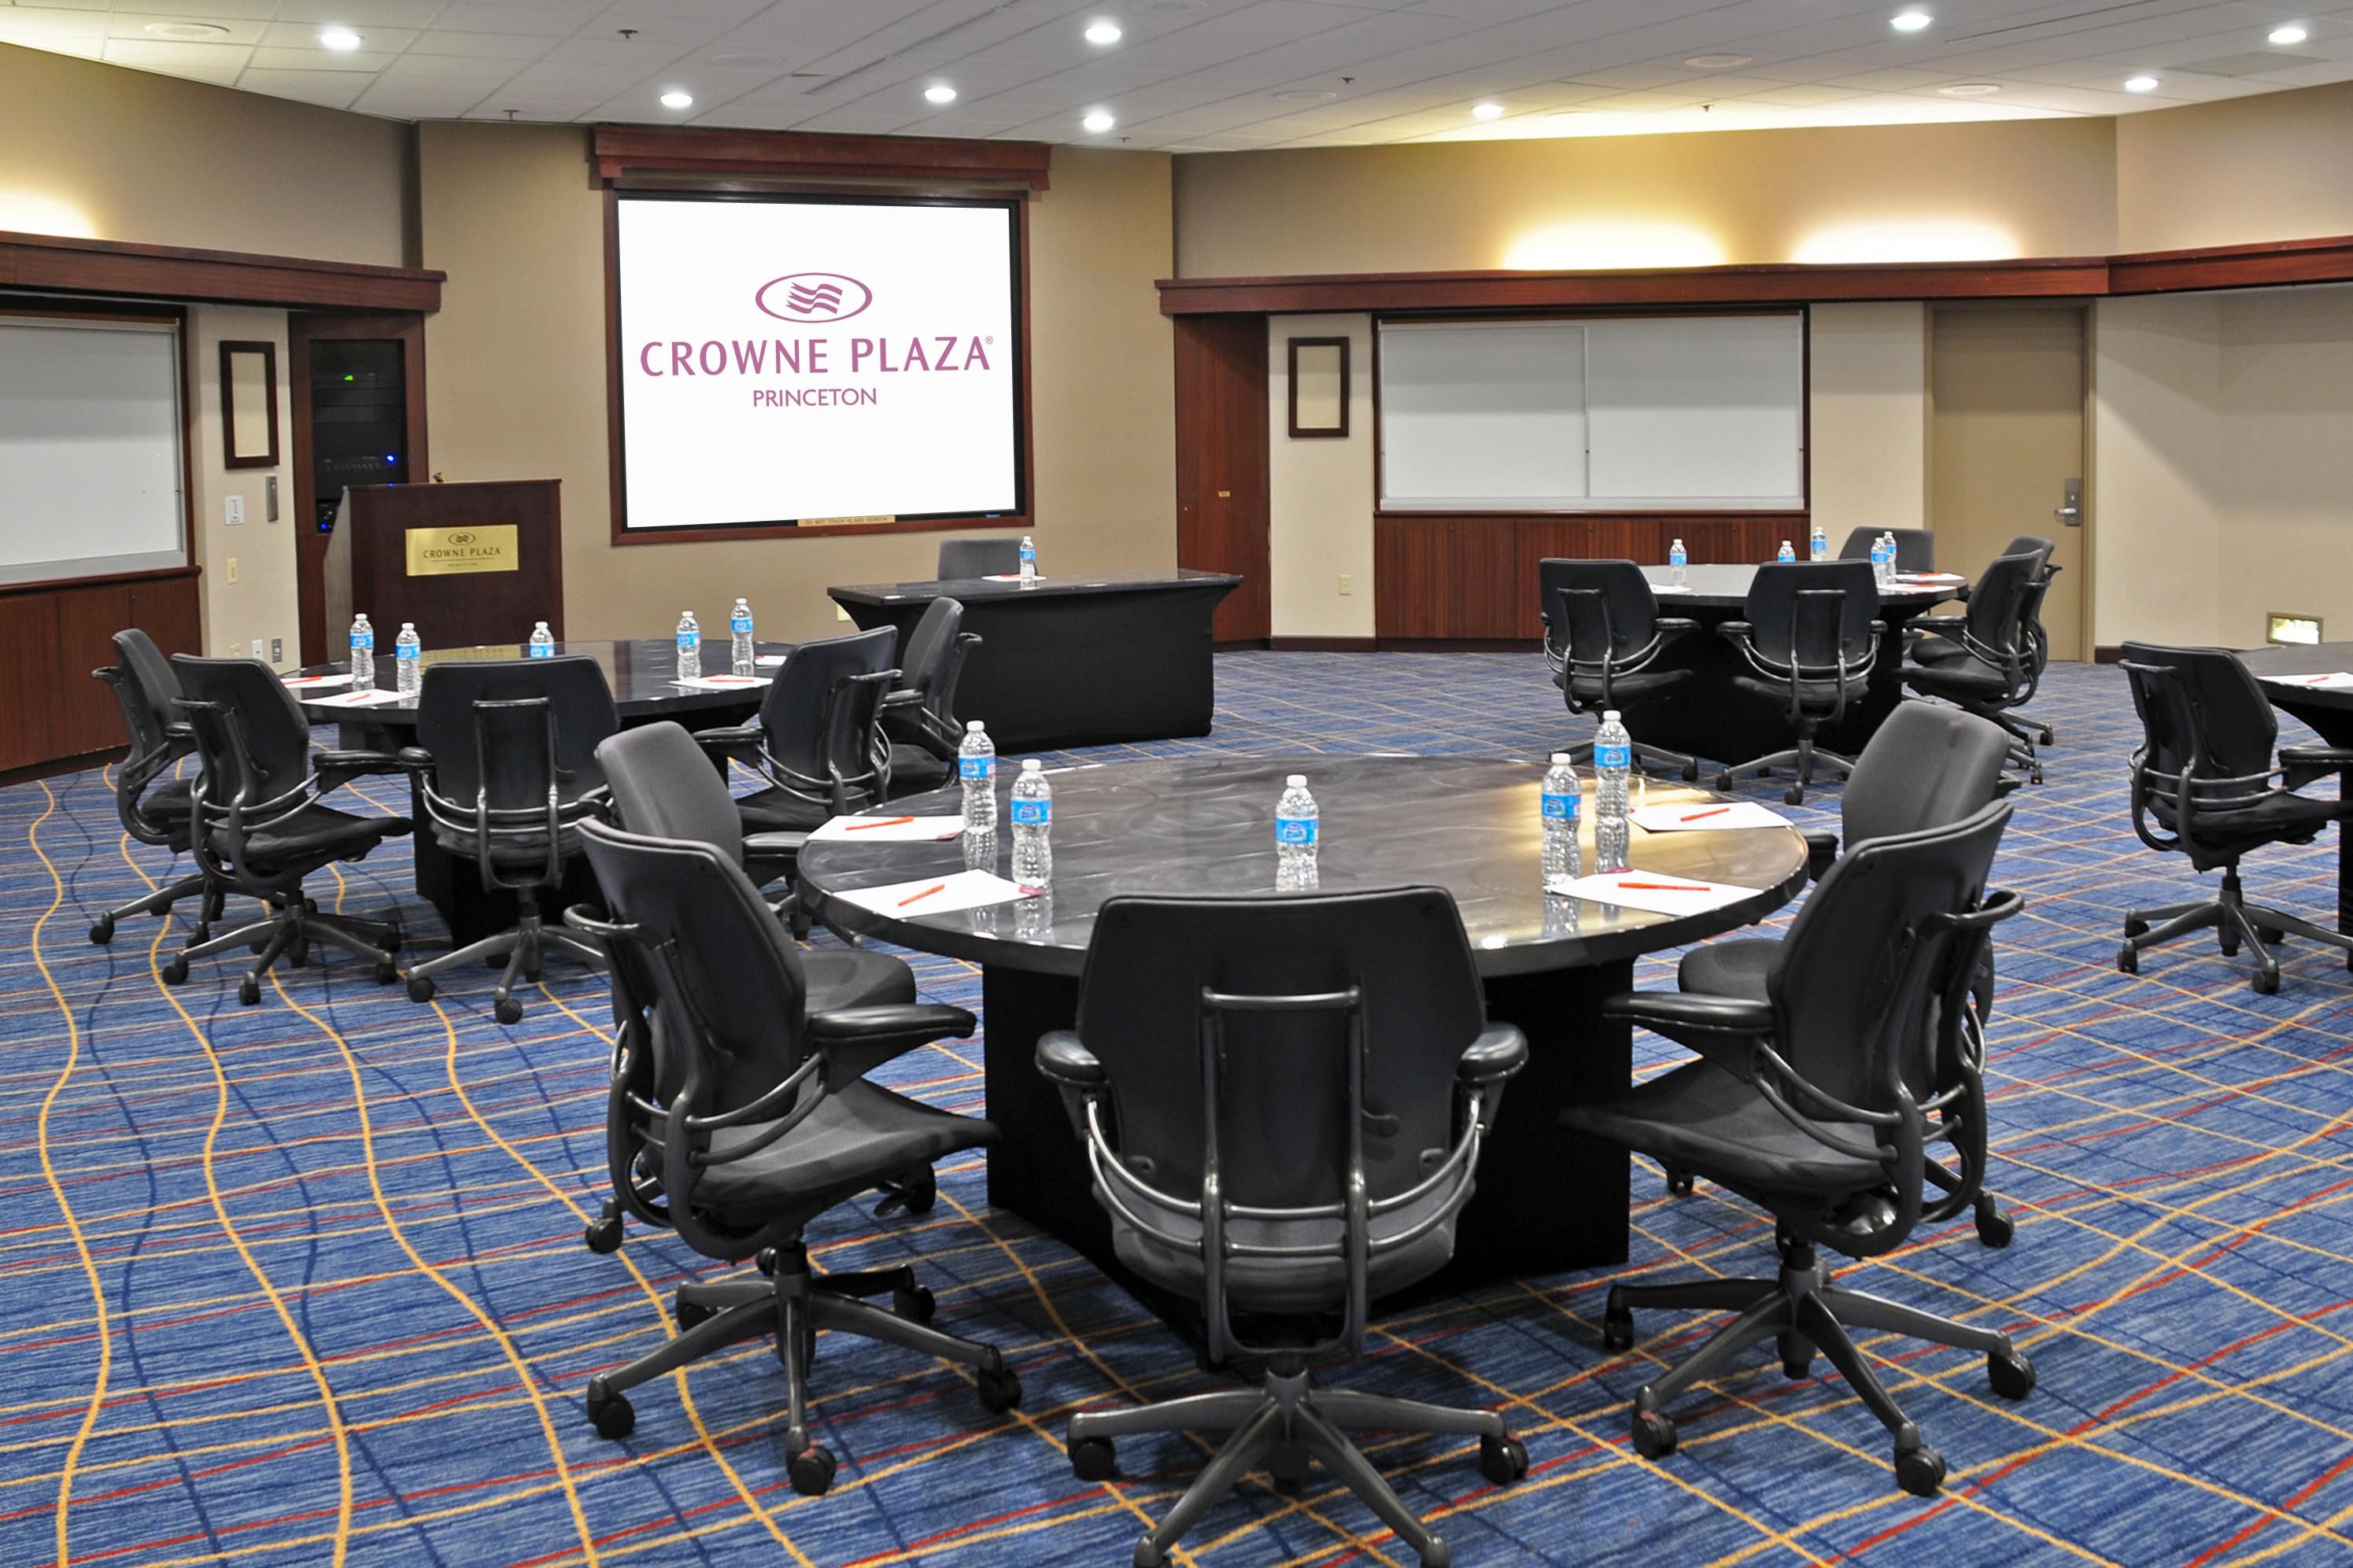 One of 54 total meeting rooms